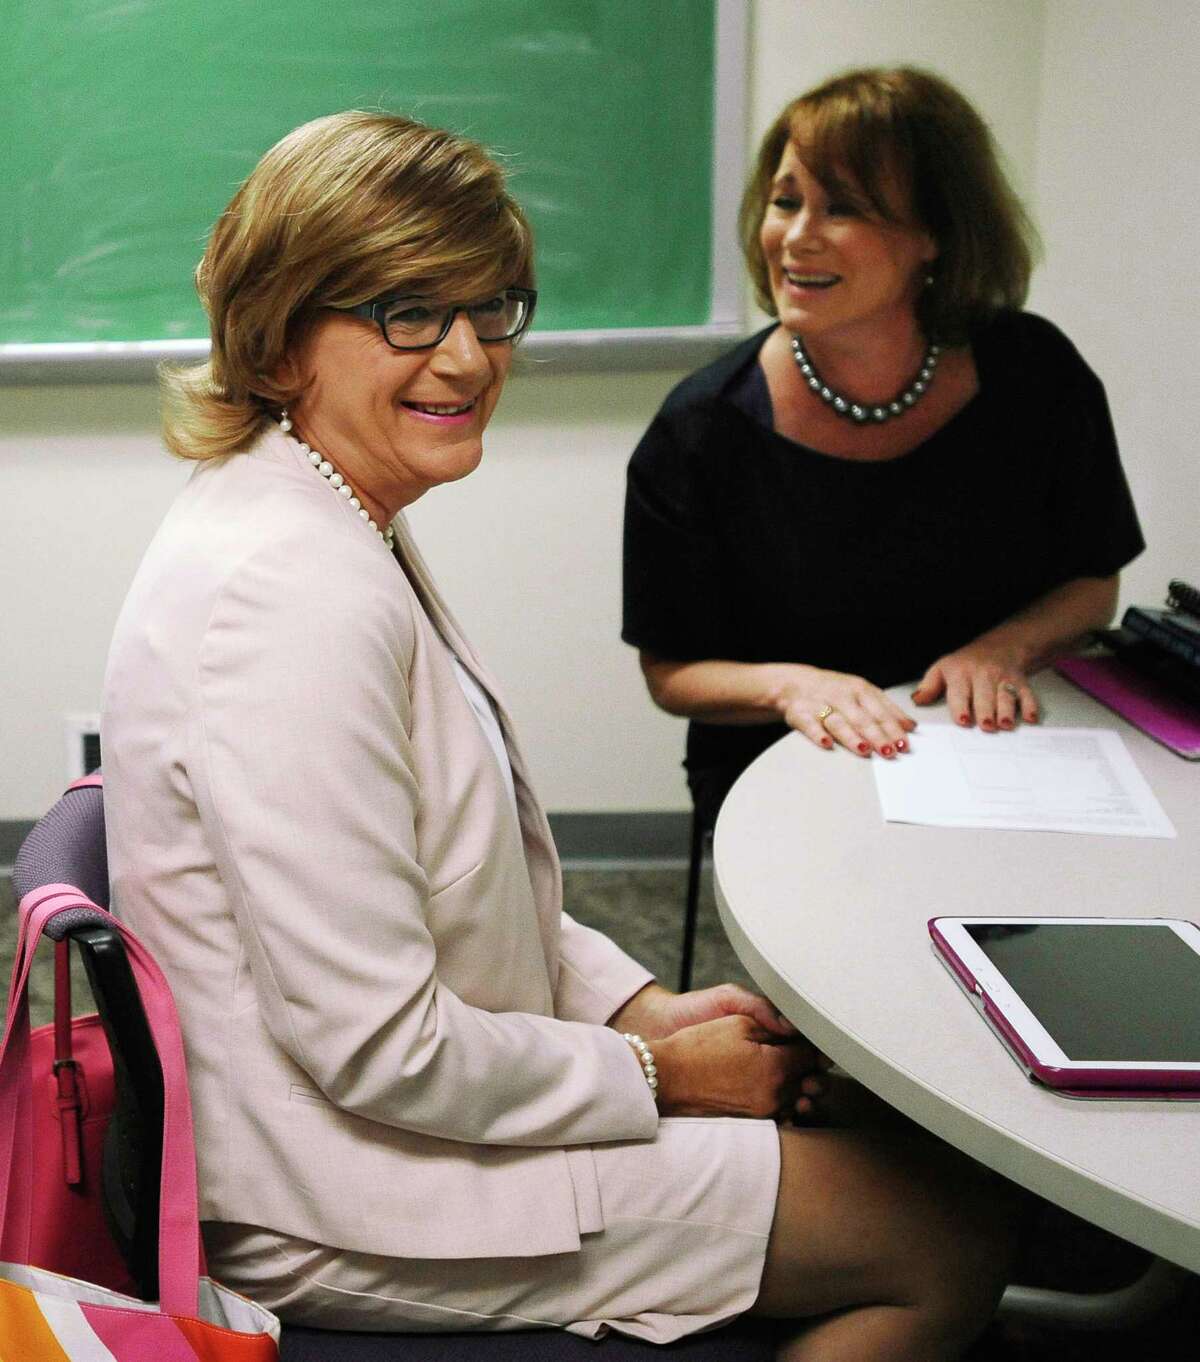 In this July 22, 2015, photo, Brianne Roberts, left, smiles as she works on voice exercises with speech-language pathologist Jean McCarthy, right, at the University of Connecticut’s Speech and Hearing Clinic in Storrs, Conn. Roberts is in a program at UConn that teaches transgender people how to sound more like the sex with which they identify.